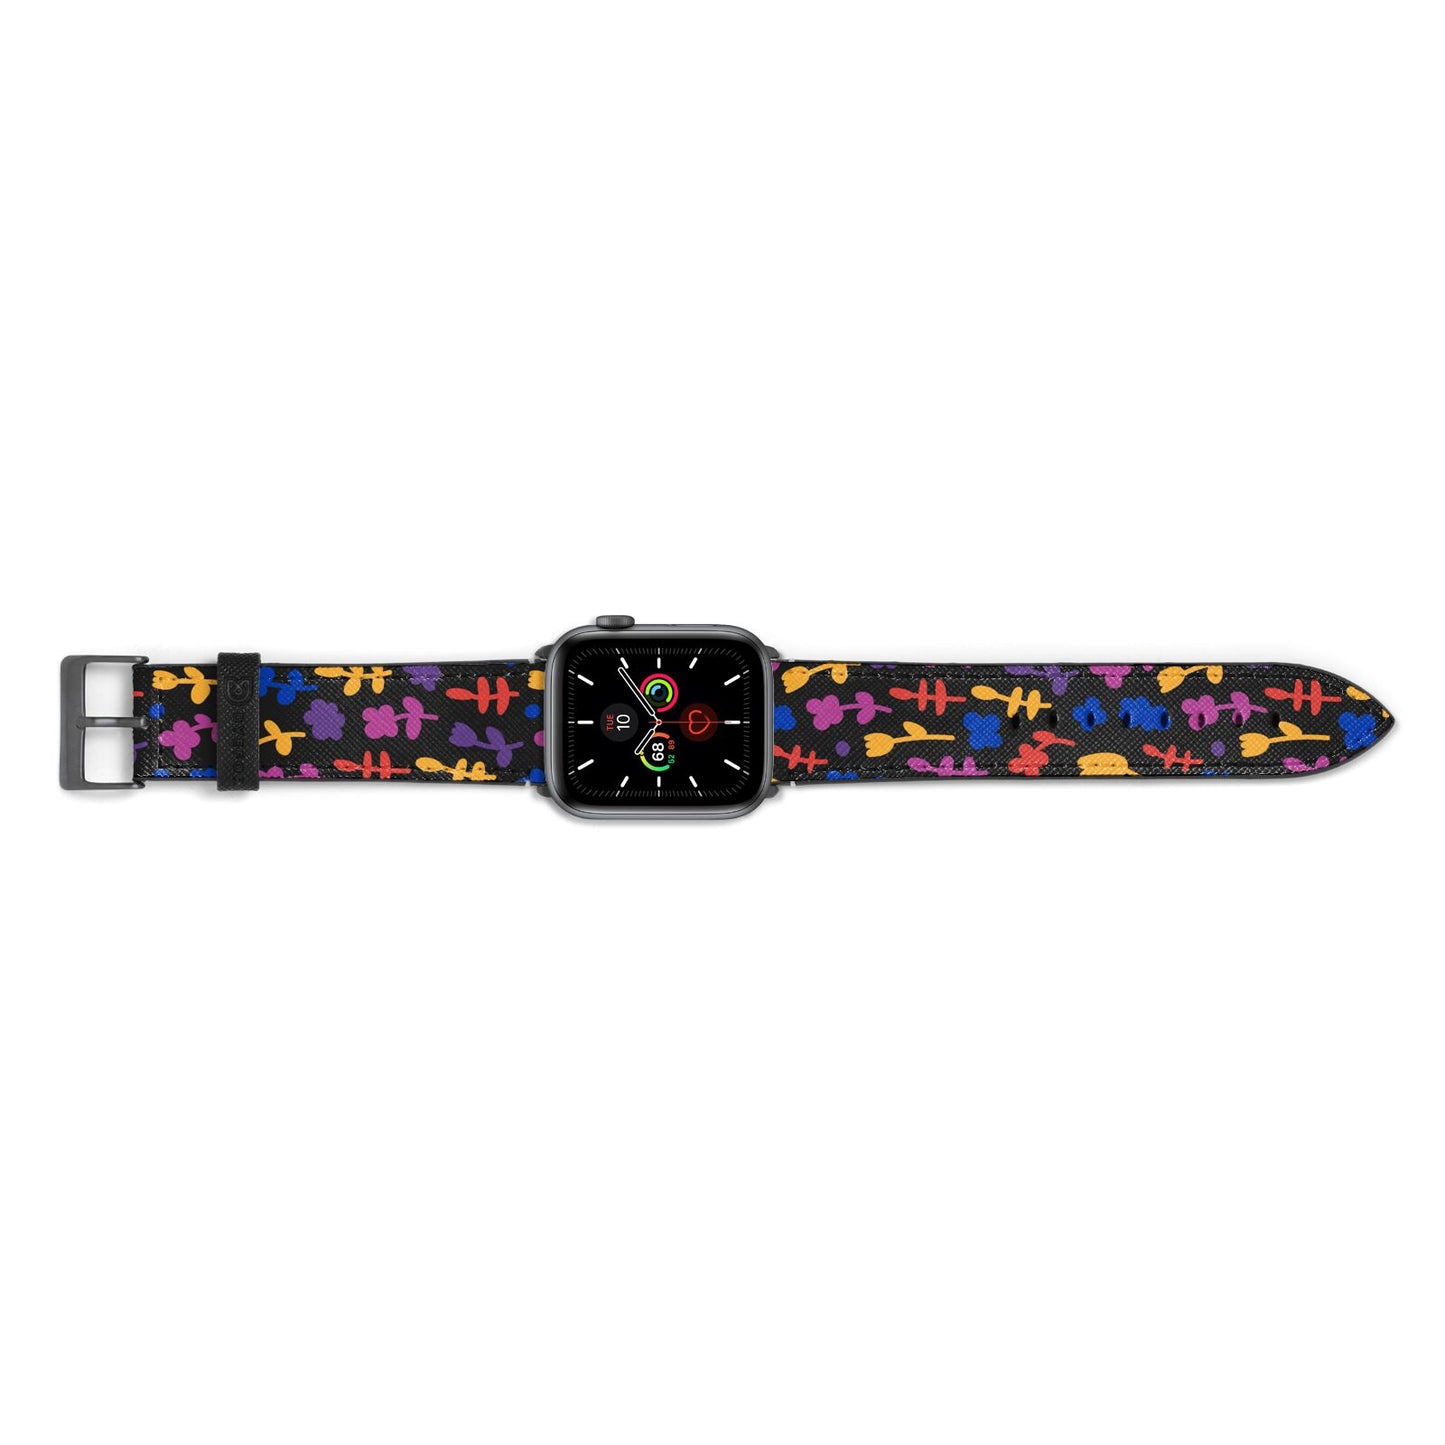 Abstract Floral Apple Watch Strap Landscape Image Space Grey Hardware